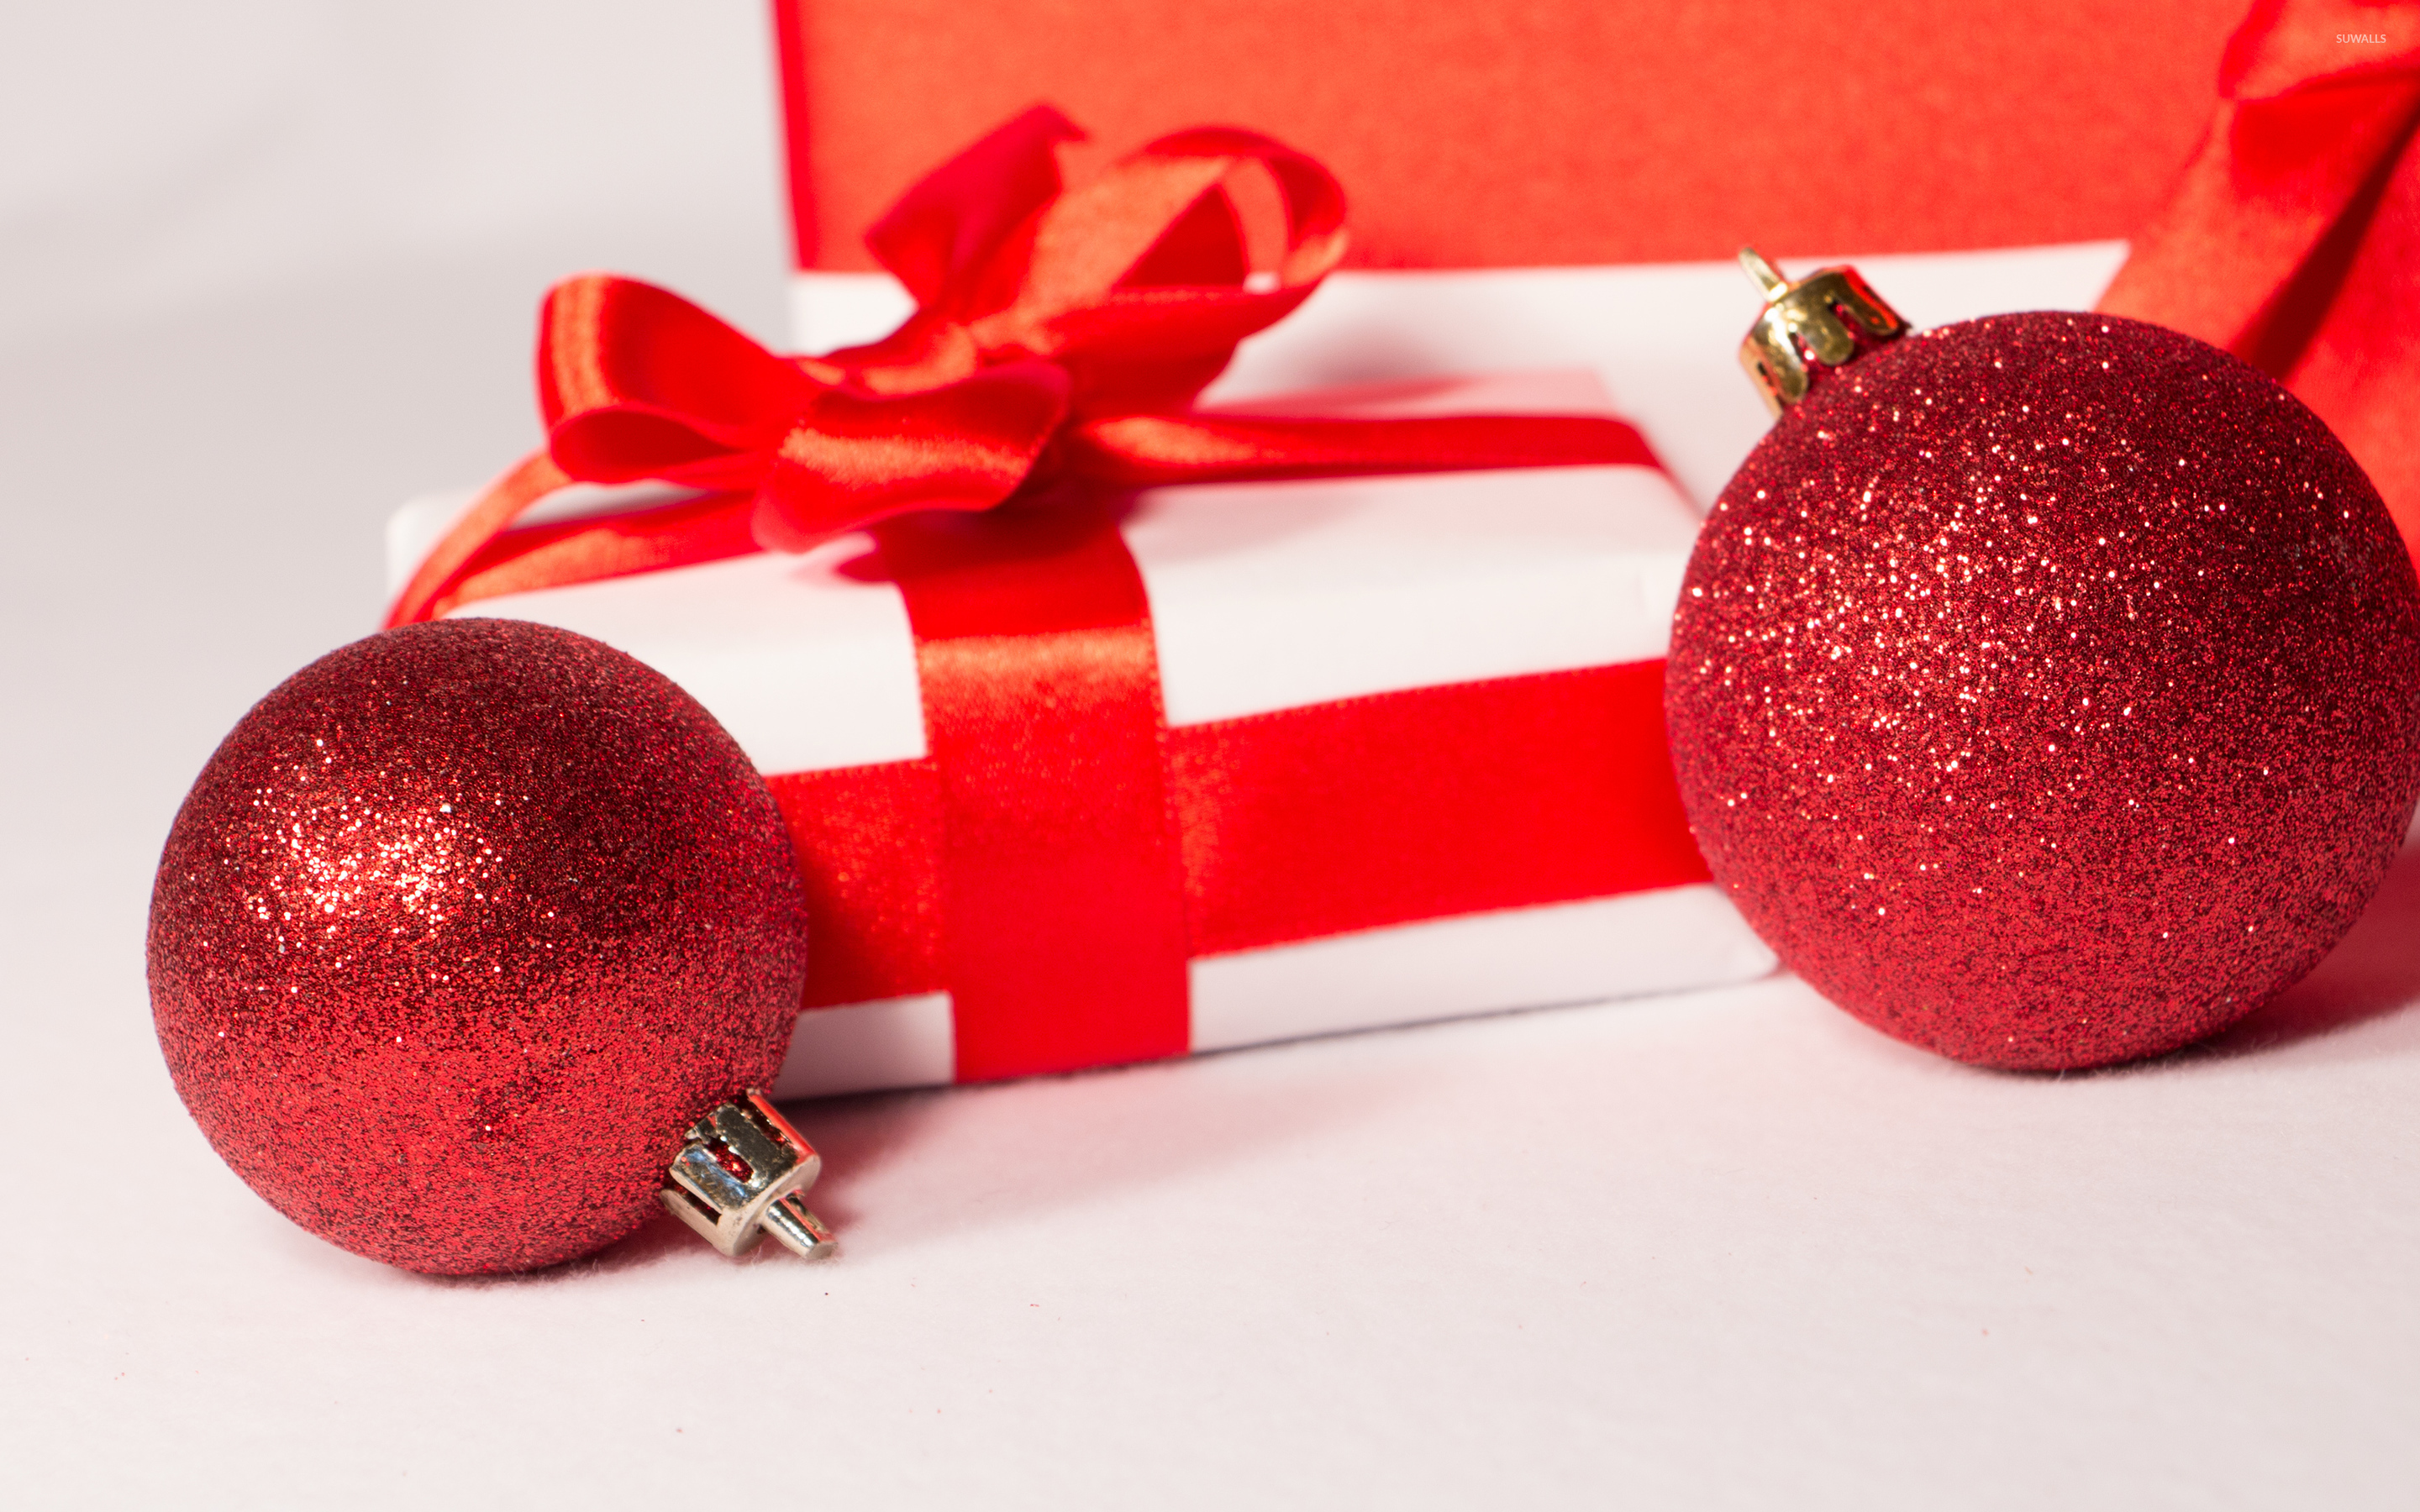 Christmas presents with two red baubles wallpaper - Holiday wallpapers ...